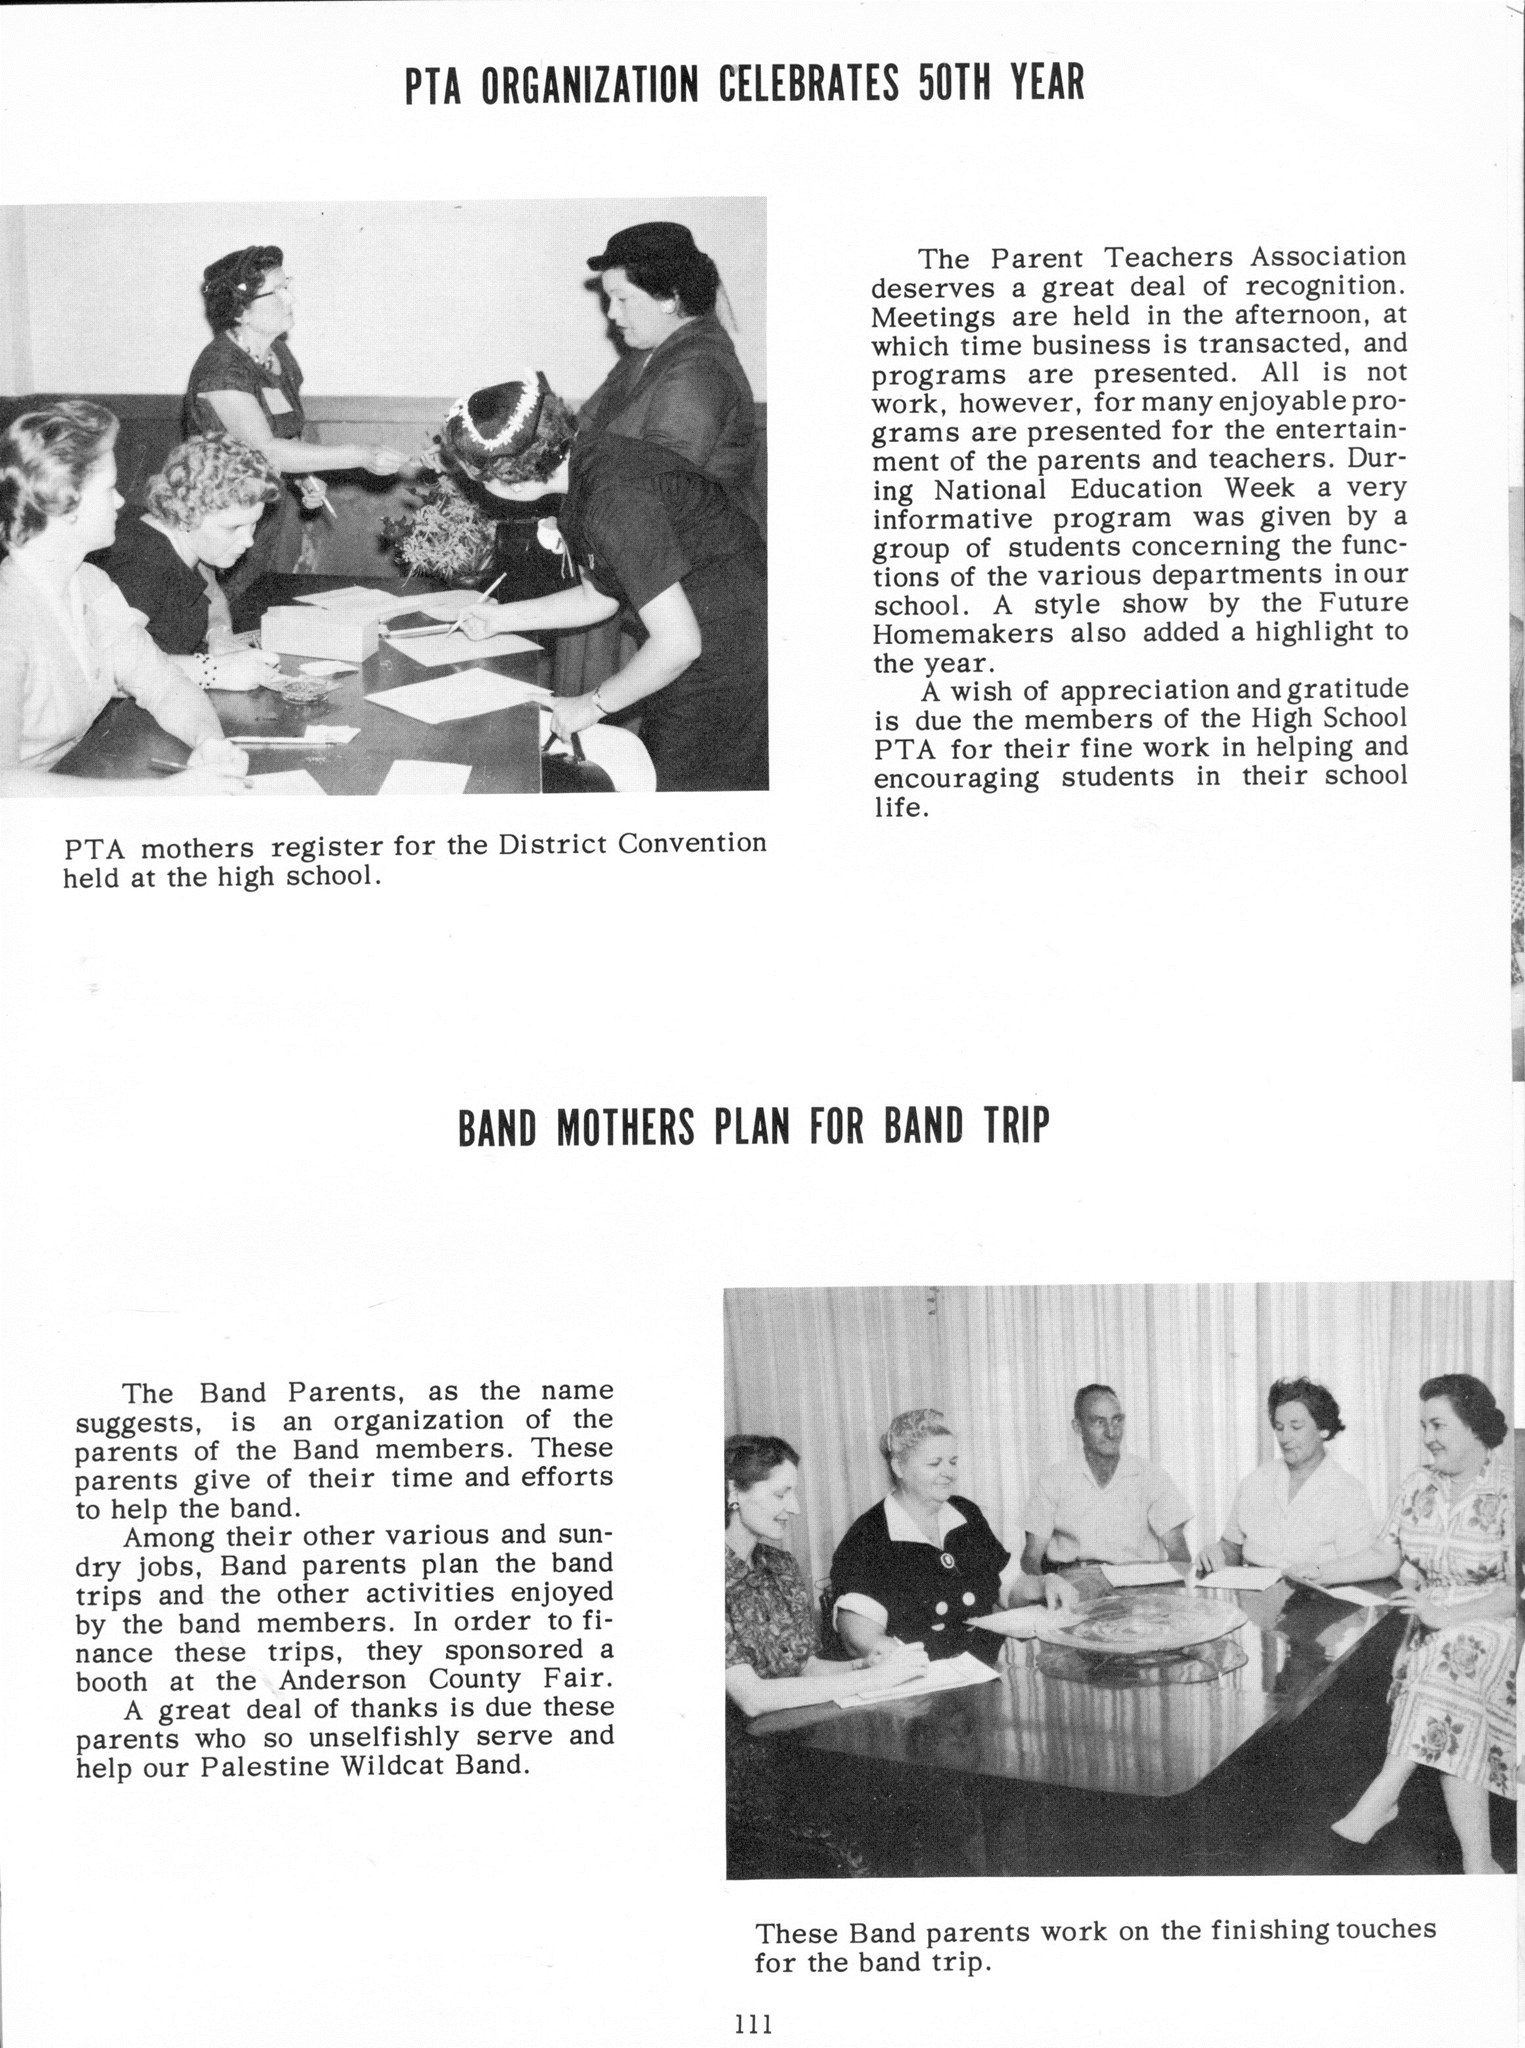 ../../../Images/Large/1960/Arclight-1960-pg0111.jpg